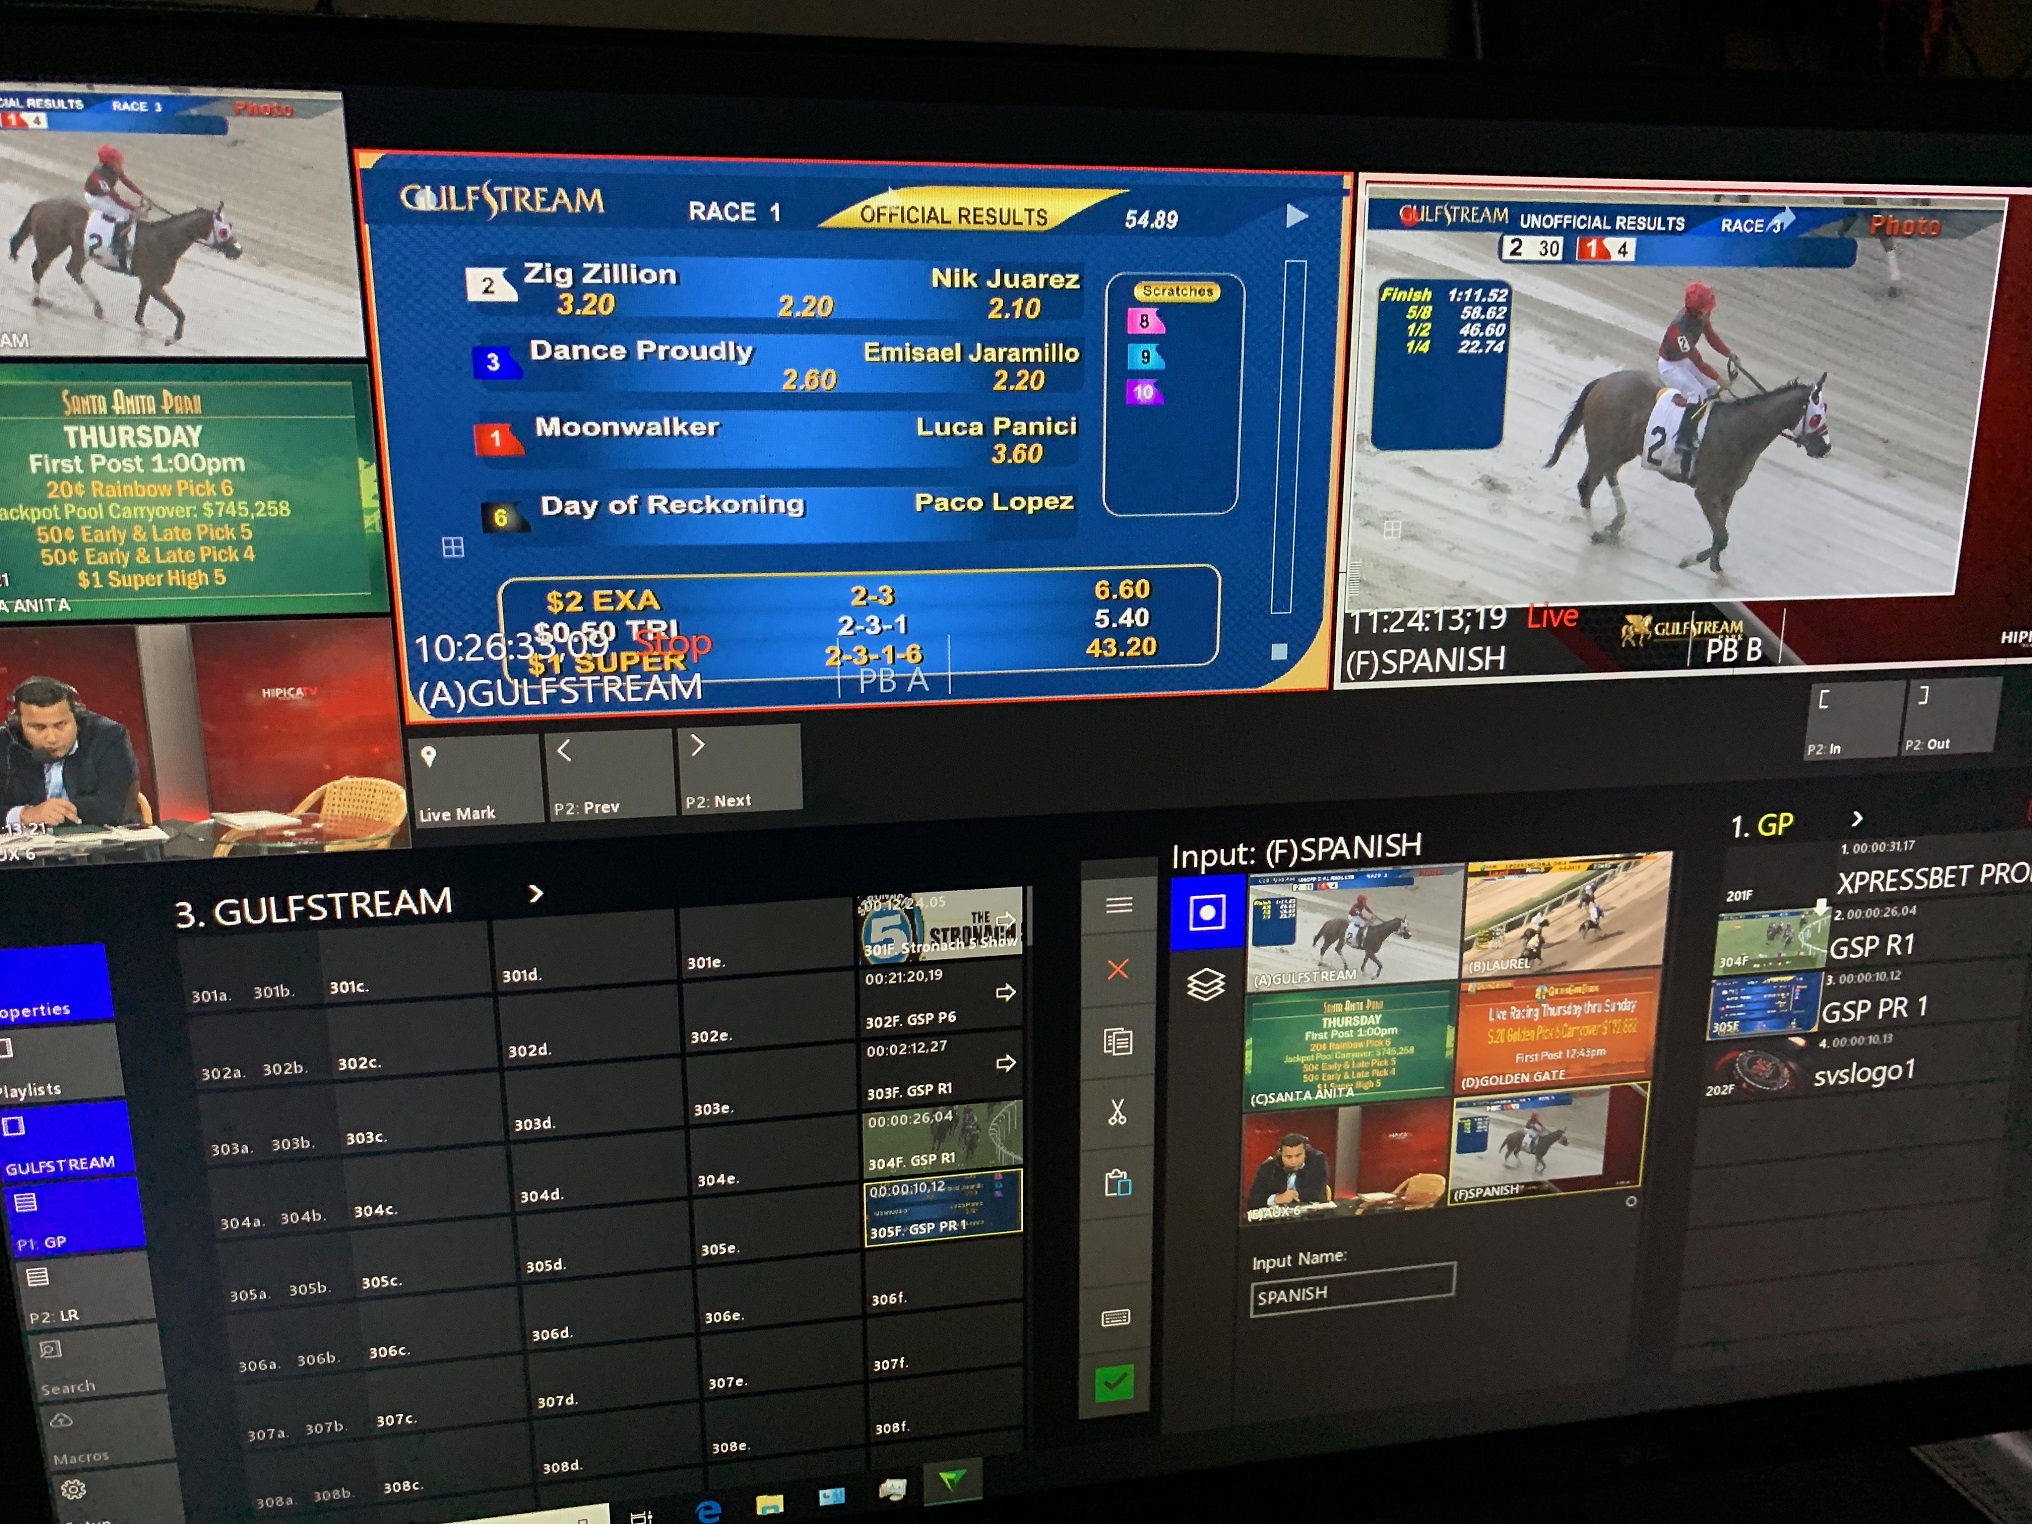 Hipica TV Selects FOR-As Exclusively Distributed Envivo Replay for Programming of Live Thoroughbred Racing